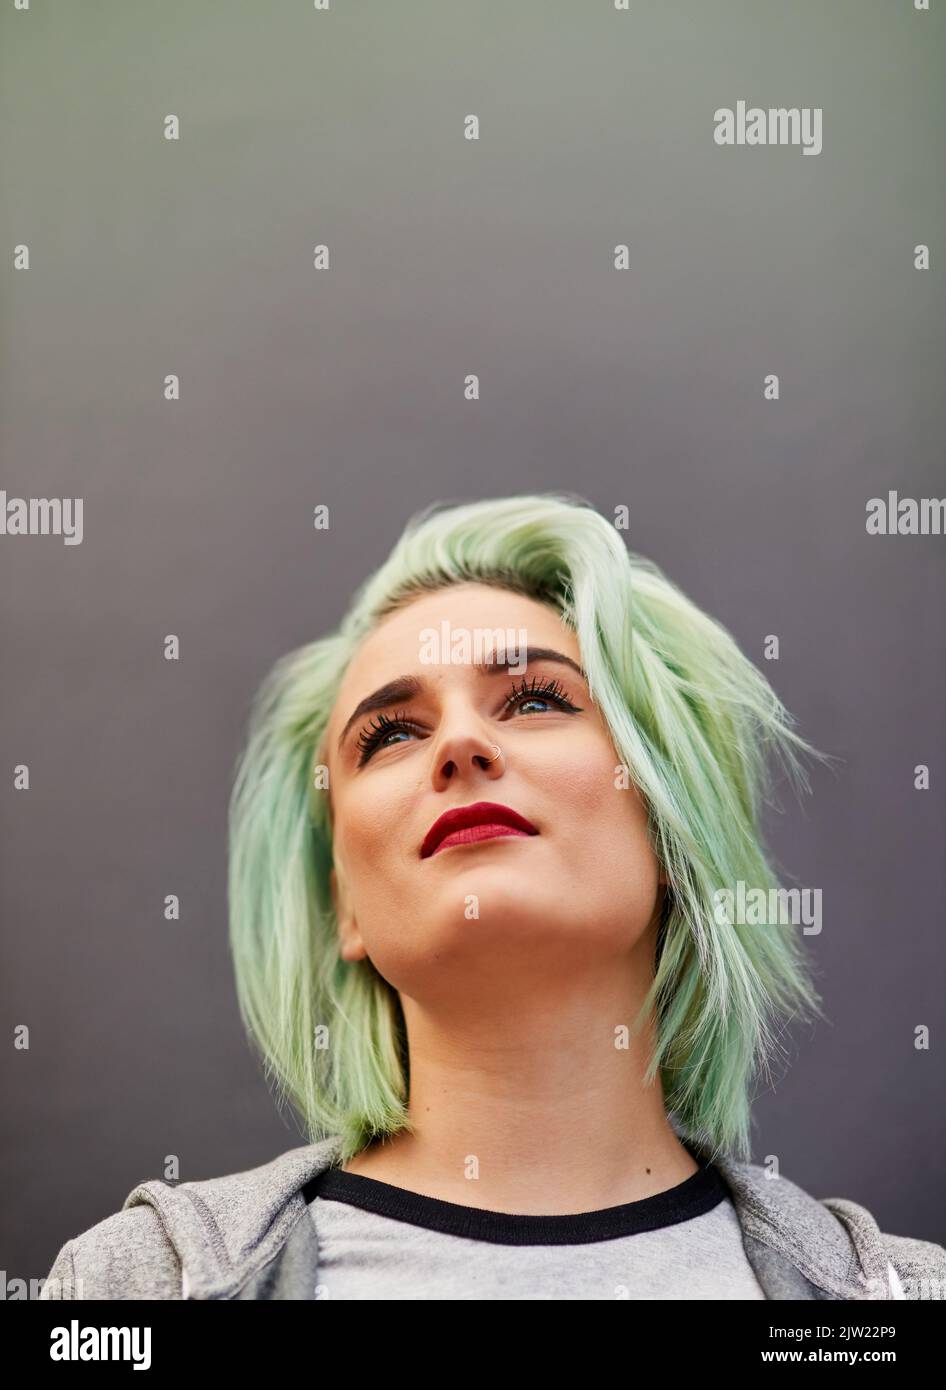 Colorful hair has character. a trendy young woman with mint green hair posing against a gray background. Stock Photo